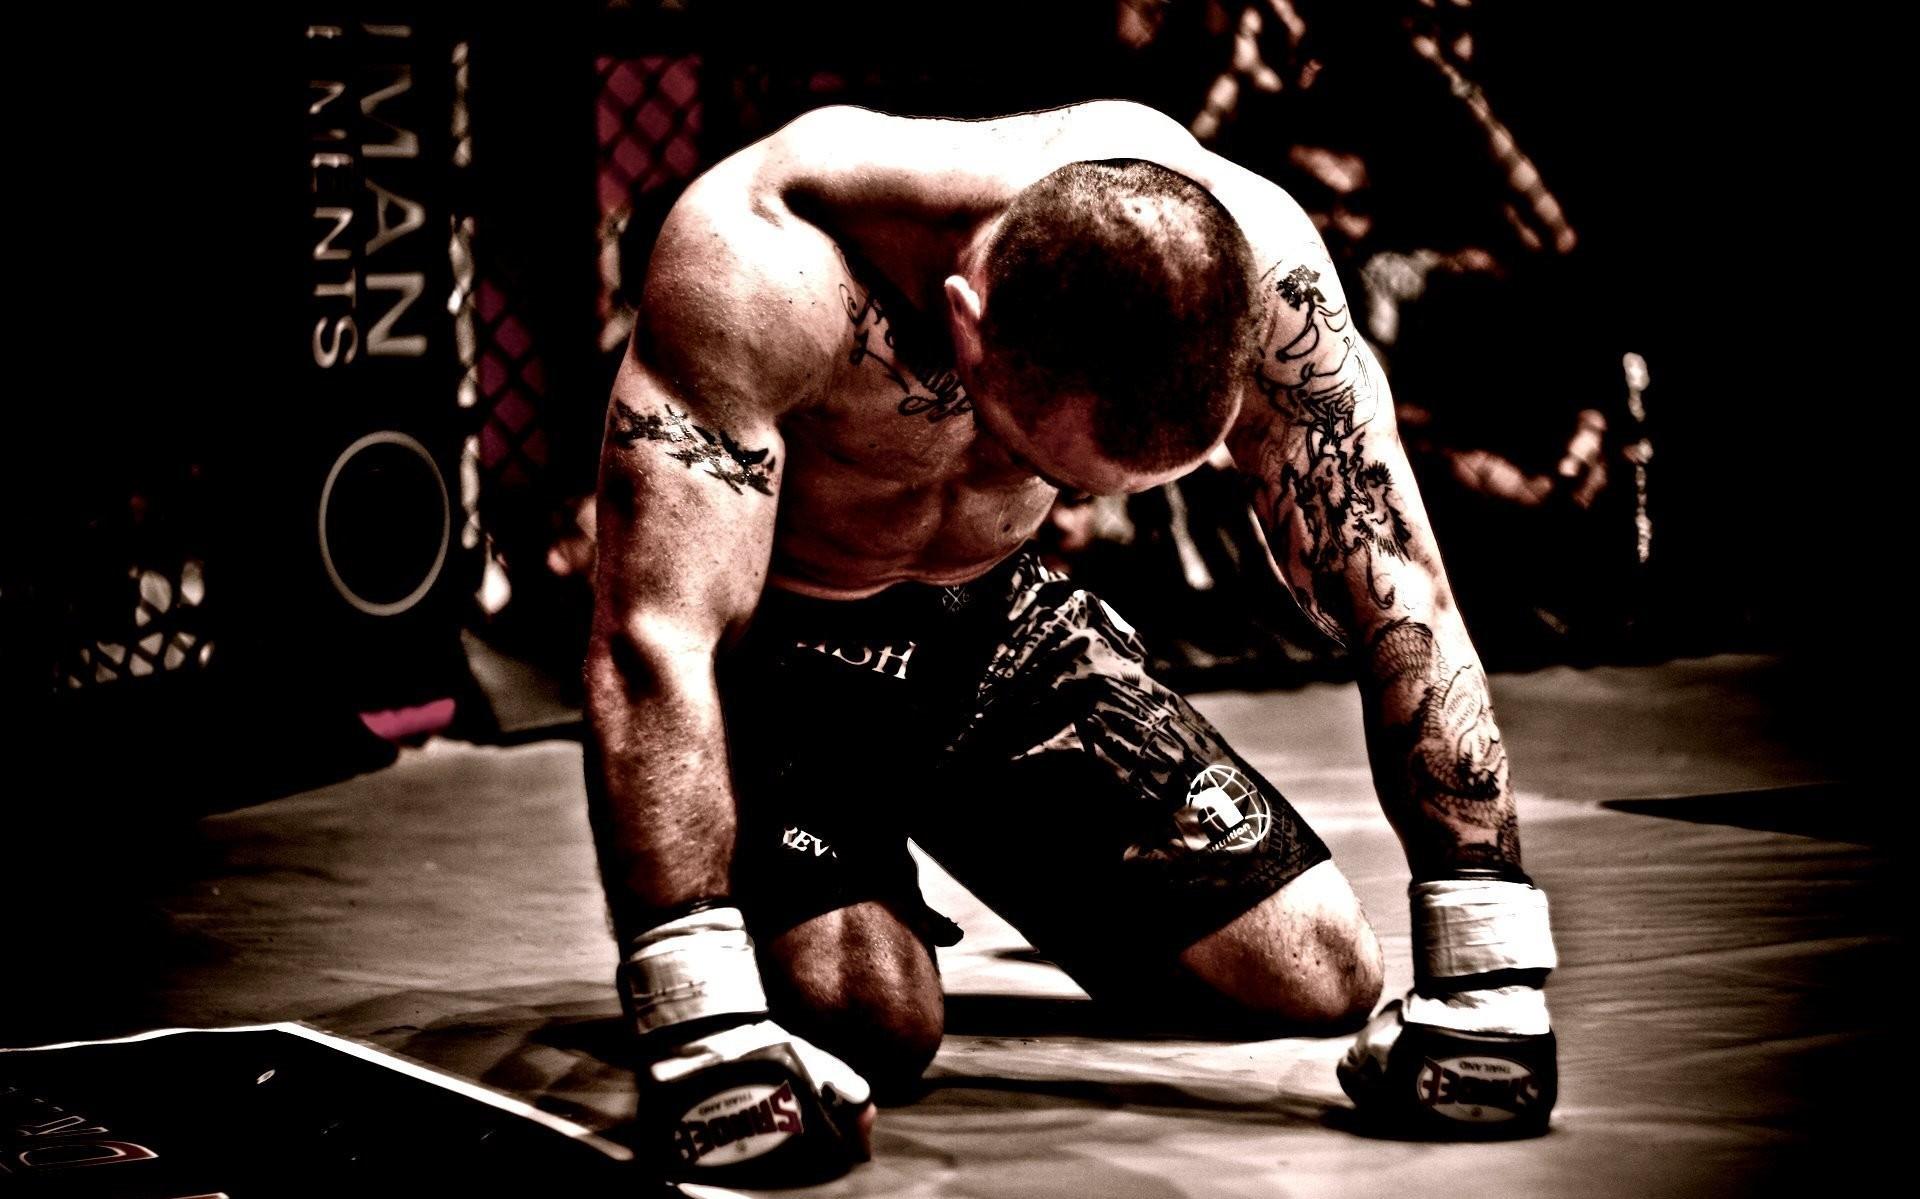 Ufc Fighters Wallpaper Pictures